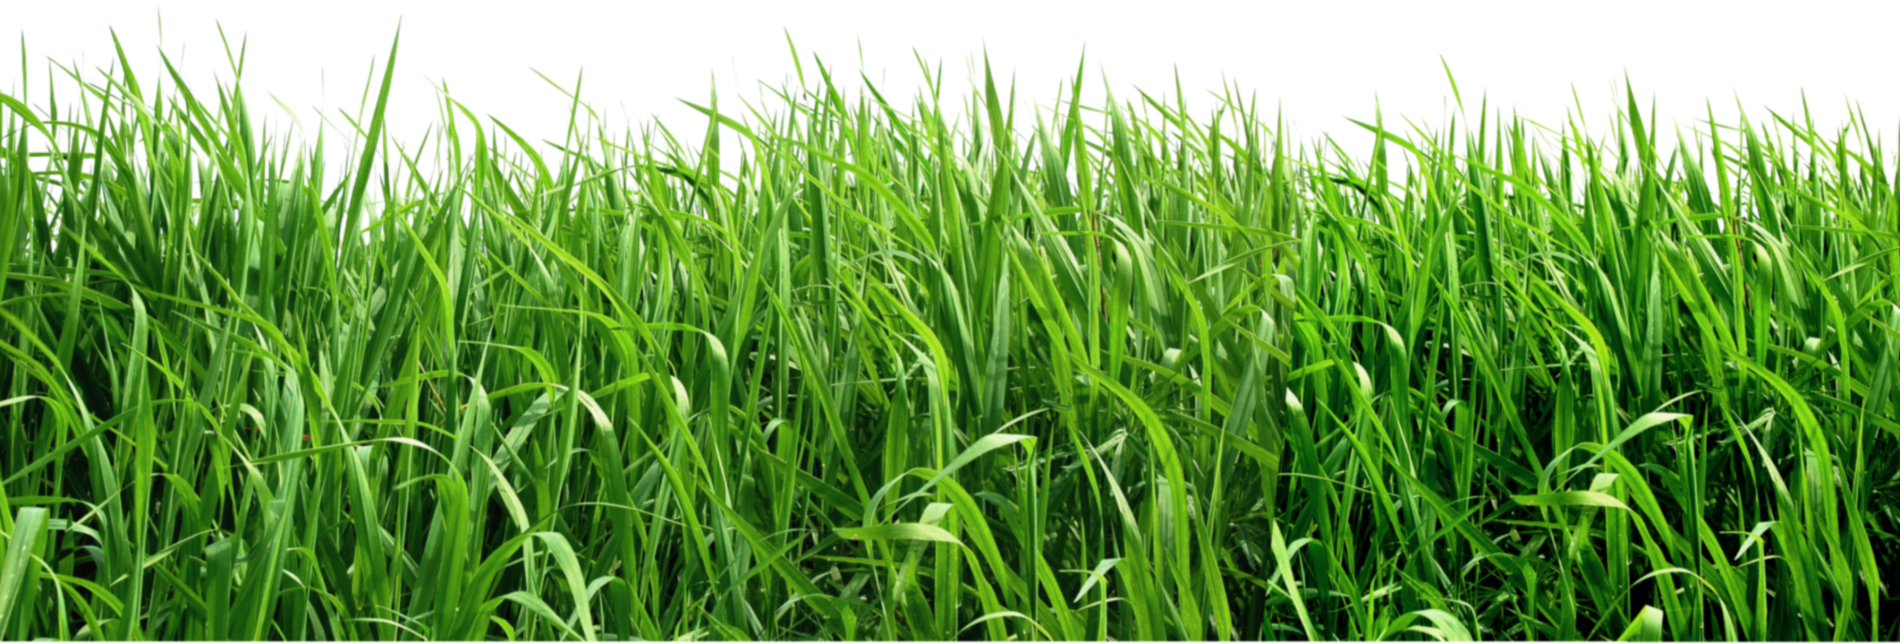 Png picture printable magnets. Grass clipart grass field